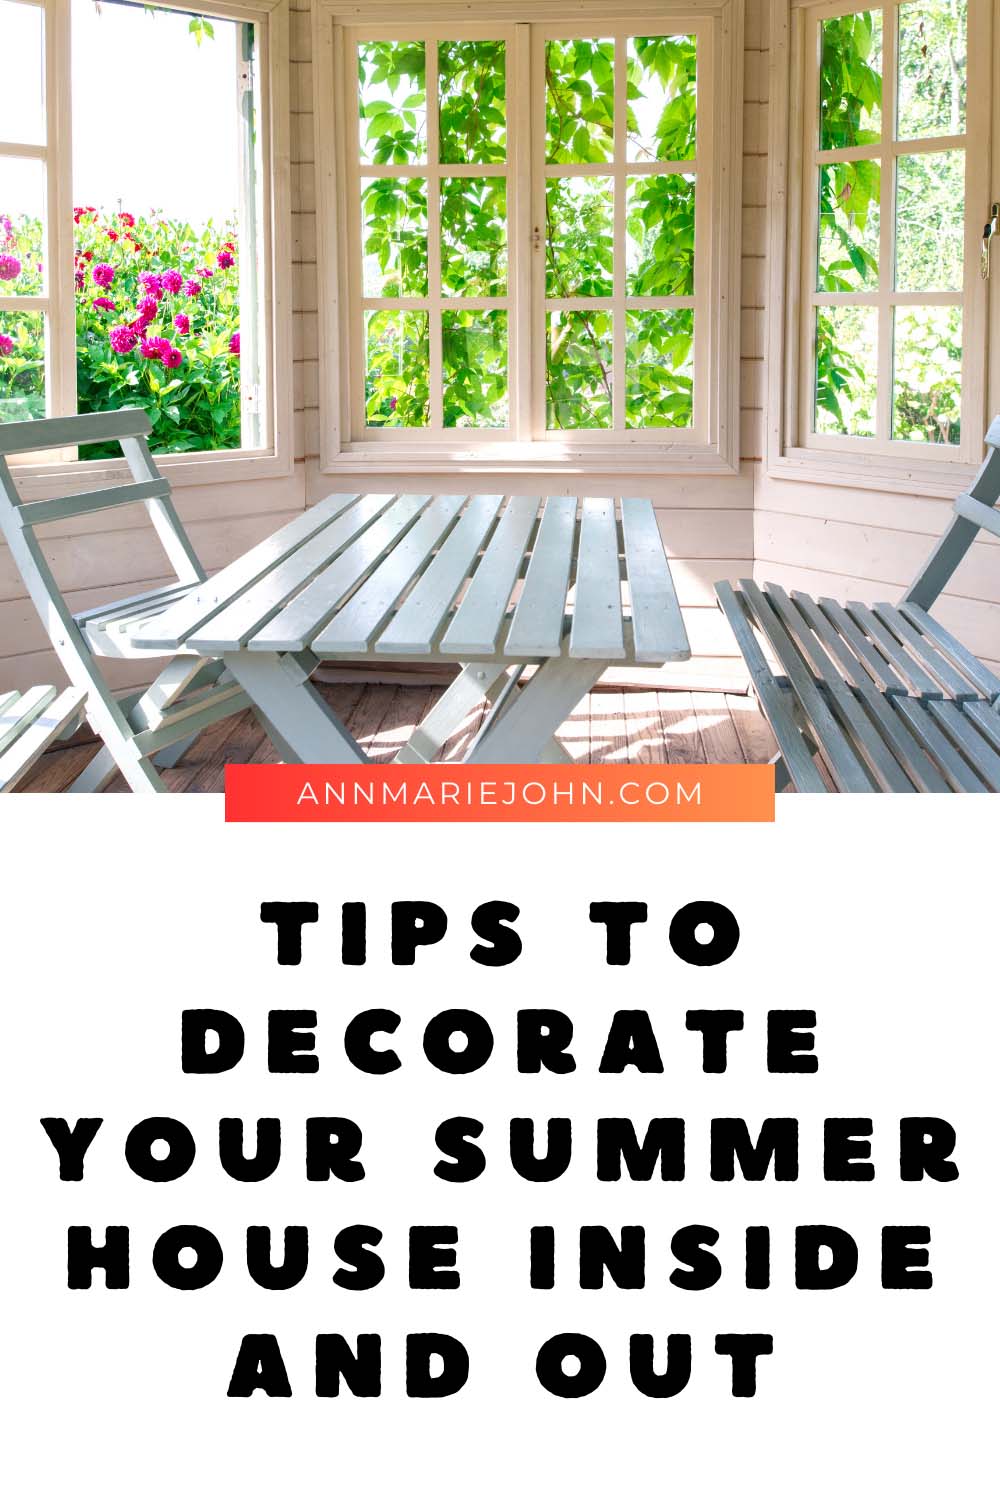 Tips to Decorate Your Summer House